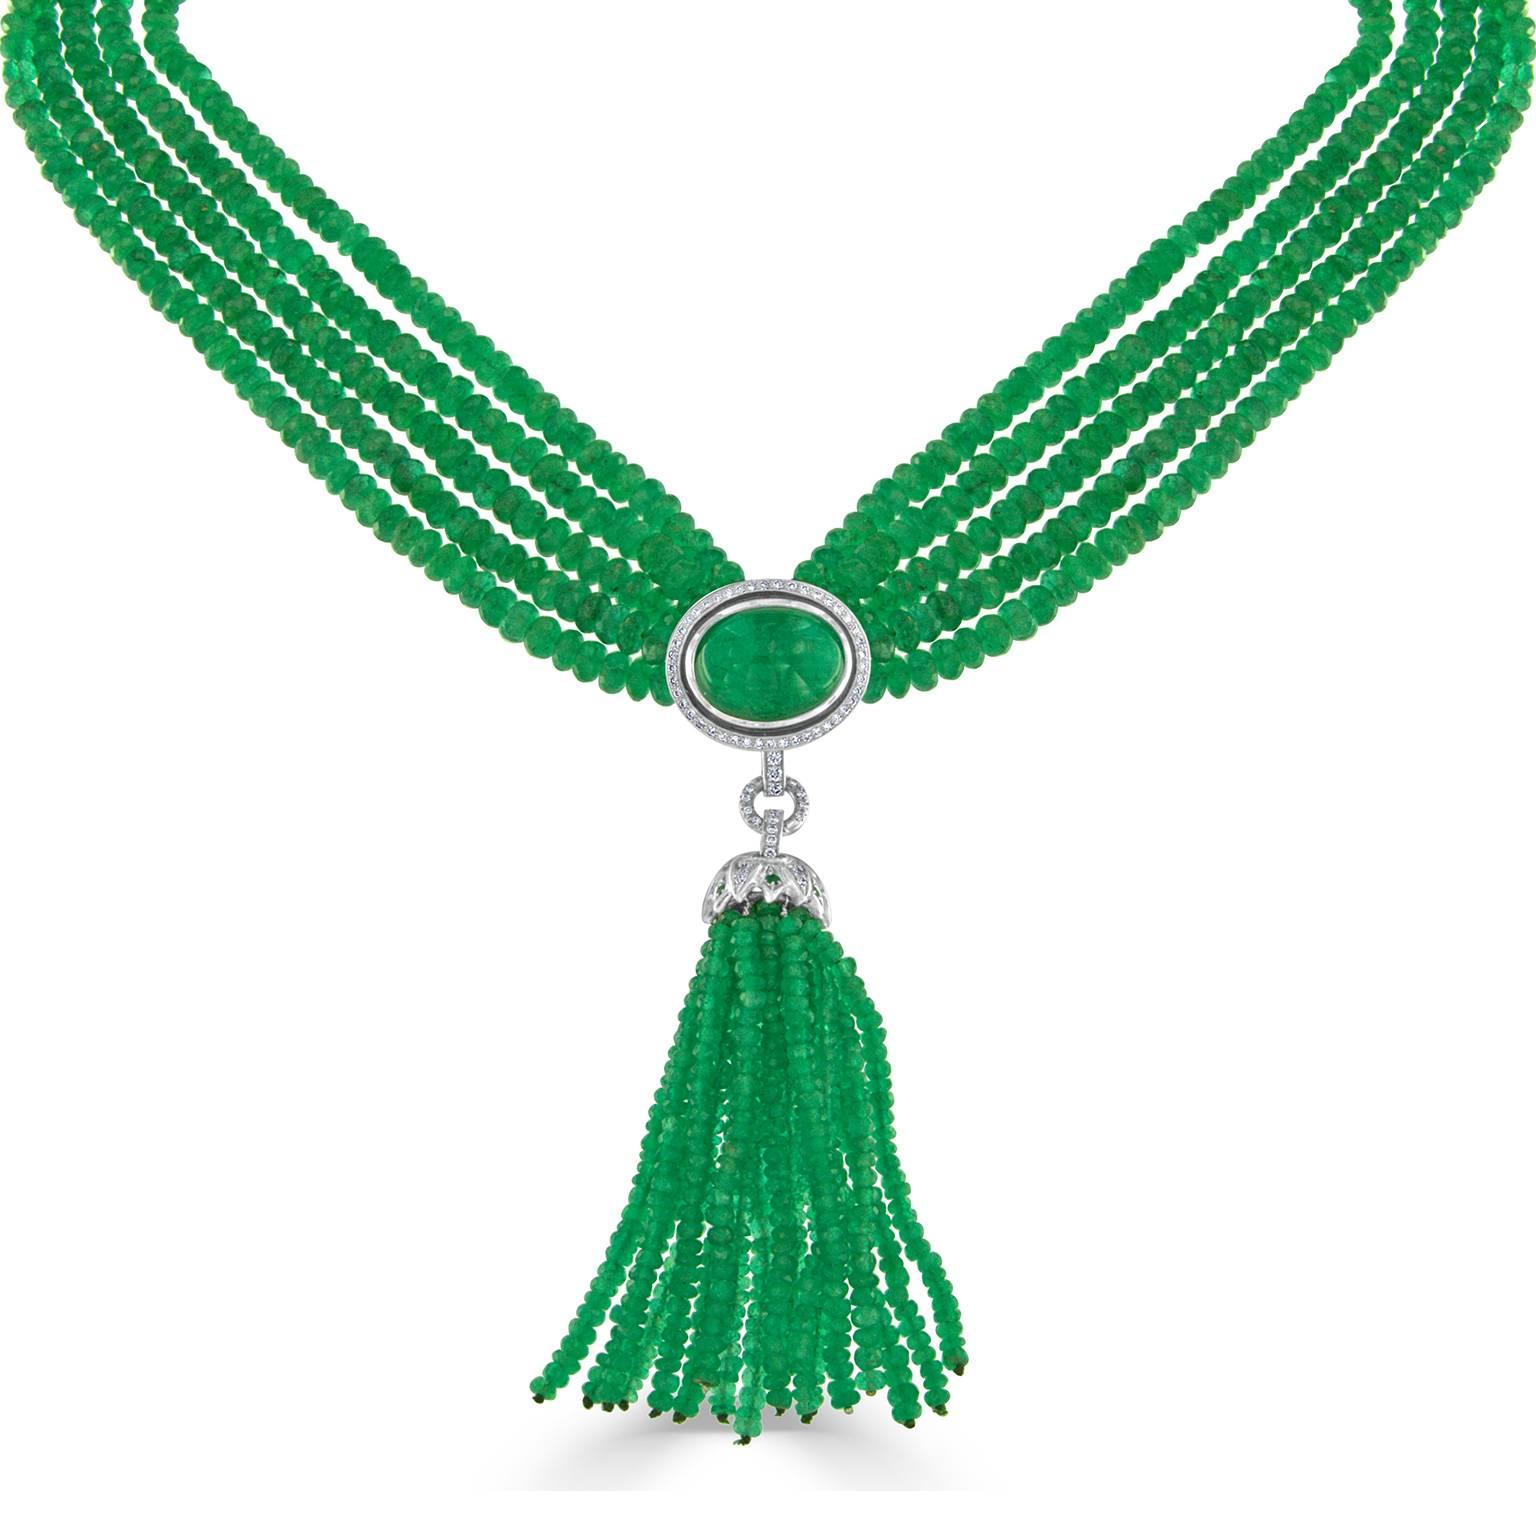 This enchanting five strand emerald and diamond 18 karat white gold necklace features 1,327 emeralds weighing 408.31 carats total. Necklace also adorned with 112 round brilliant cut diamonds weighing 1.01 carats total. Measuring 16 inches in length,